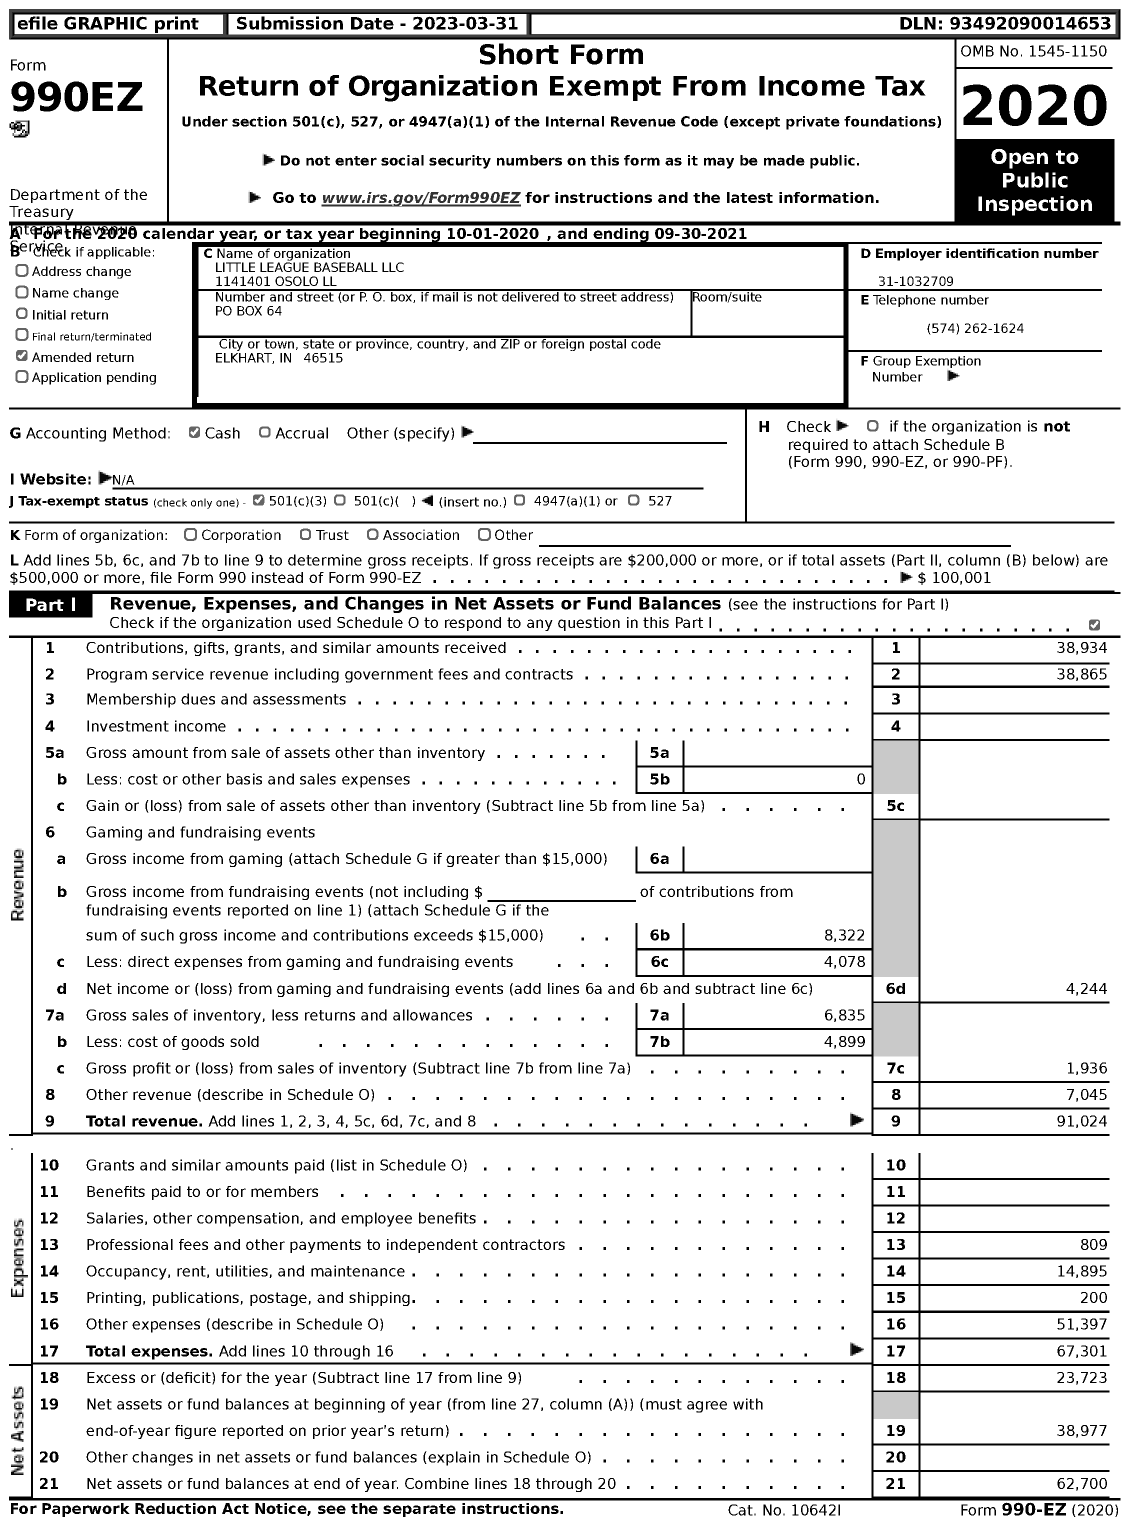 Image of first page of 2020 Form 990EZ for Little League Baseball - 1141401 Osolo LL